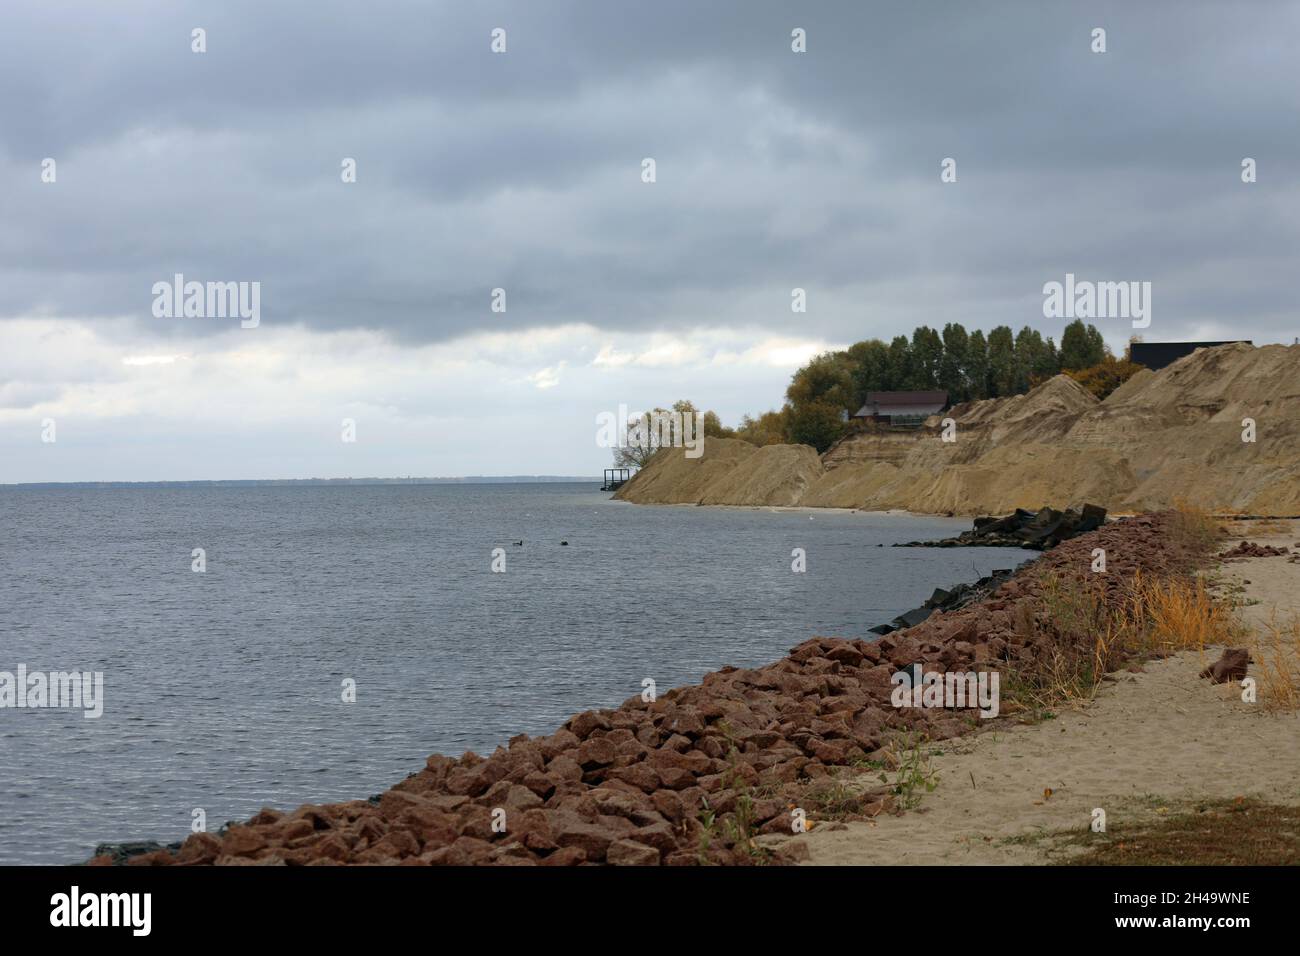 Contaminated Water Reservoir in the Ukraine called Kyiv Sea Stock Photo